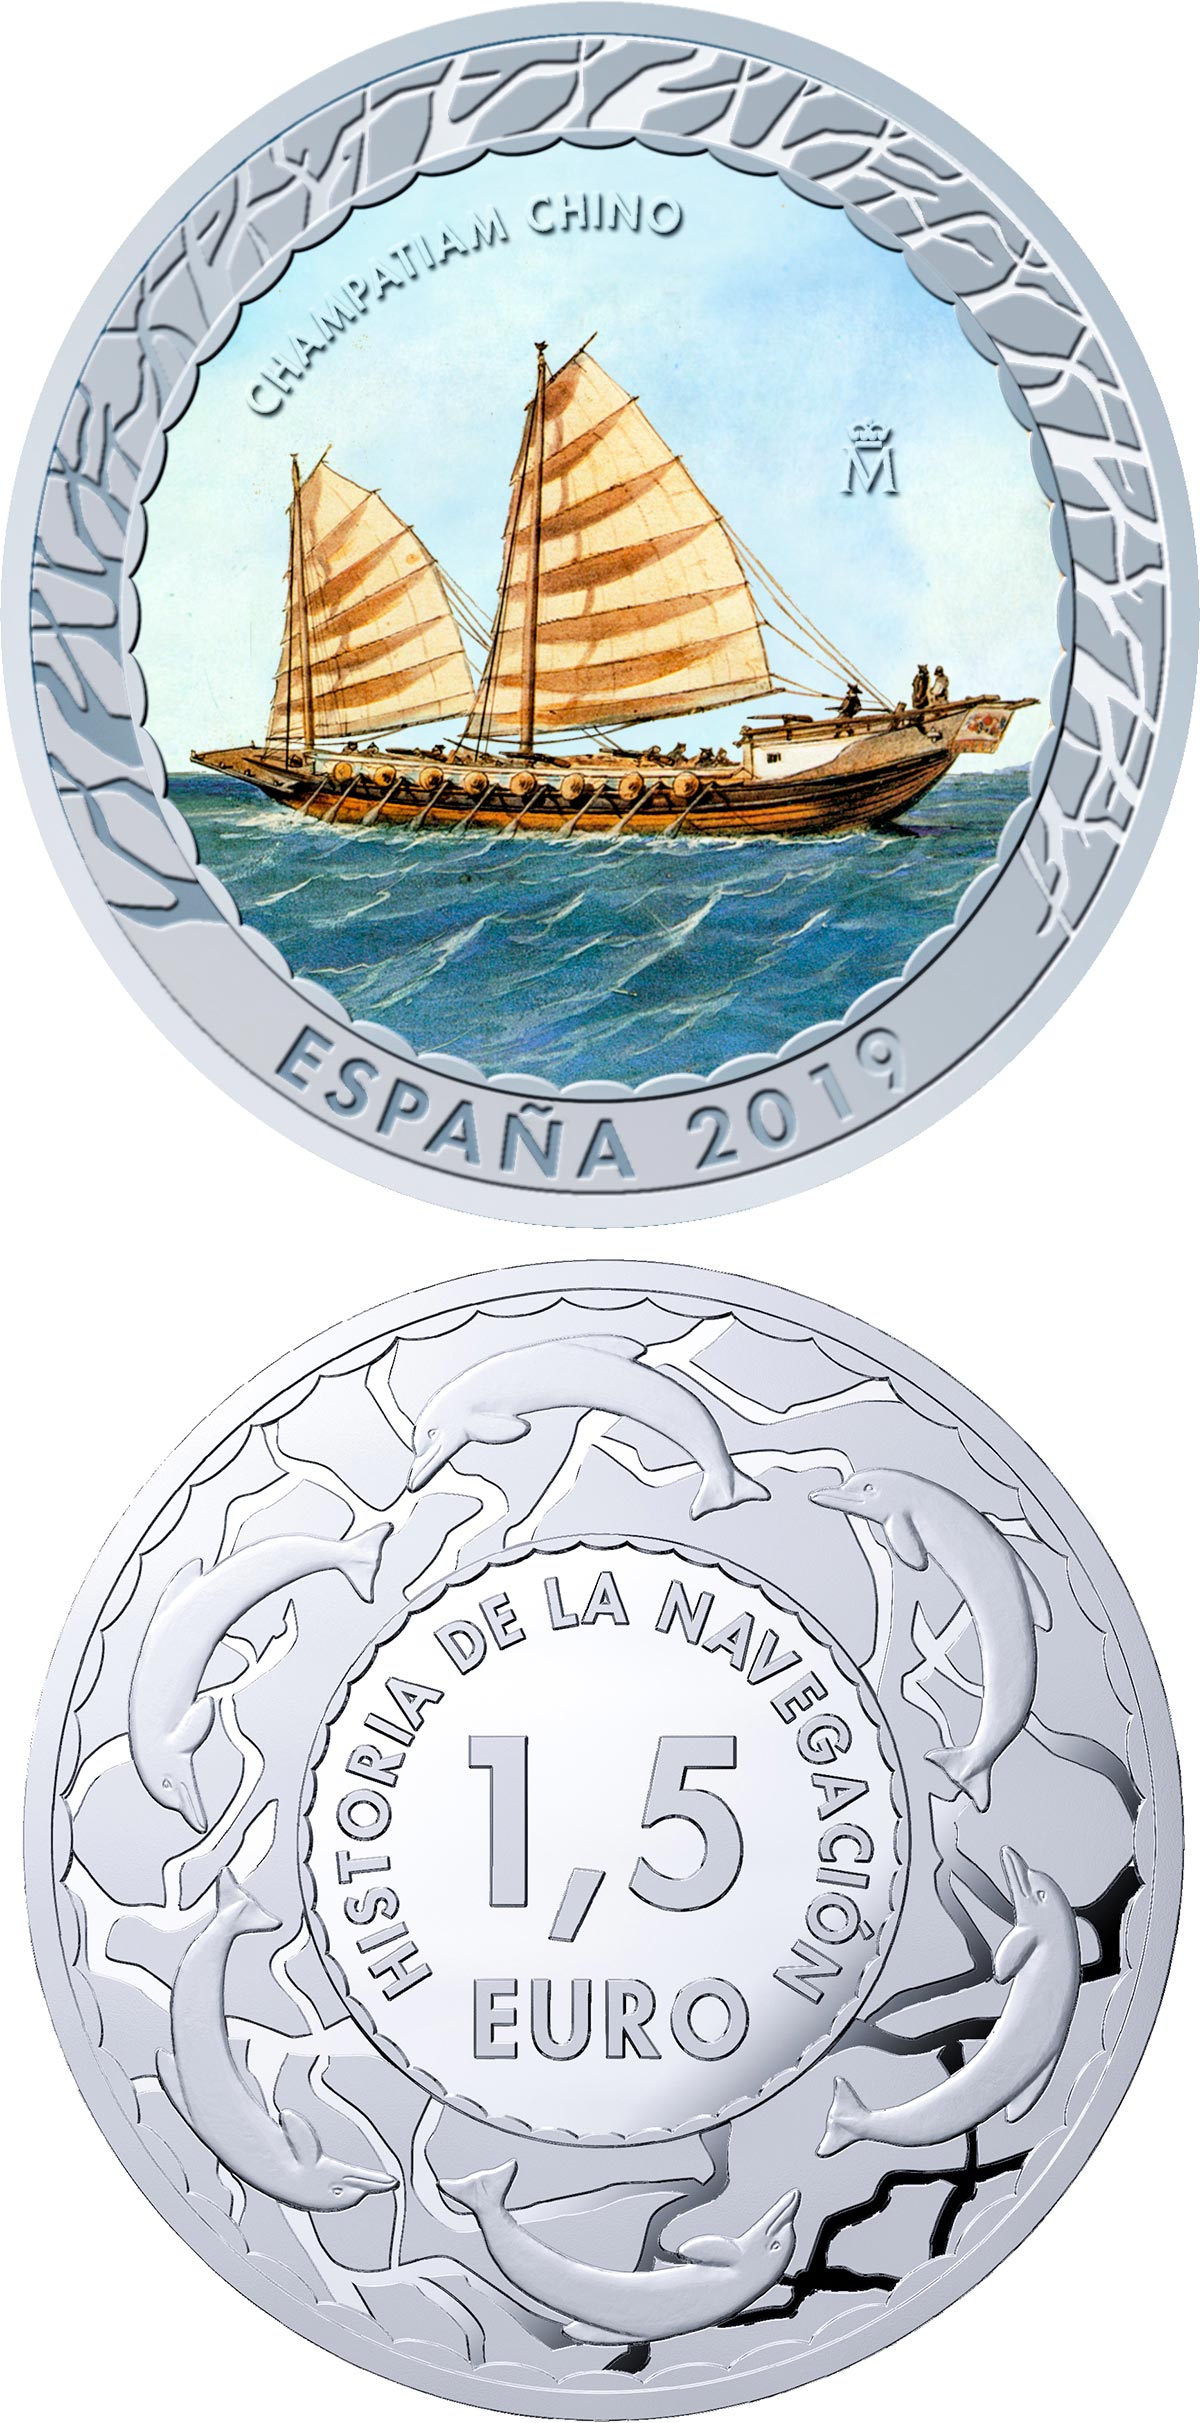 Image of 1.5 euro coin - Chinese sampan | Spain 2019.  The Copper–Nickel (CuNi) coin is of BU quality.